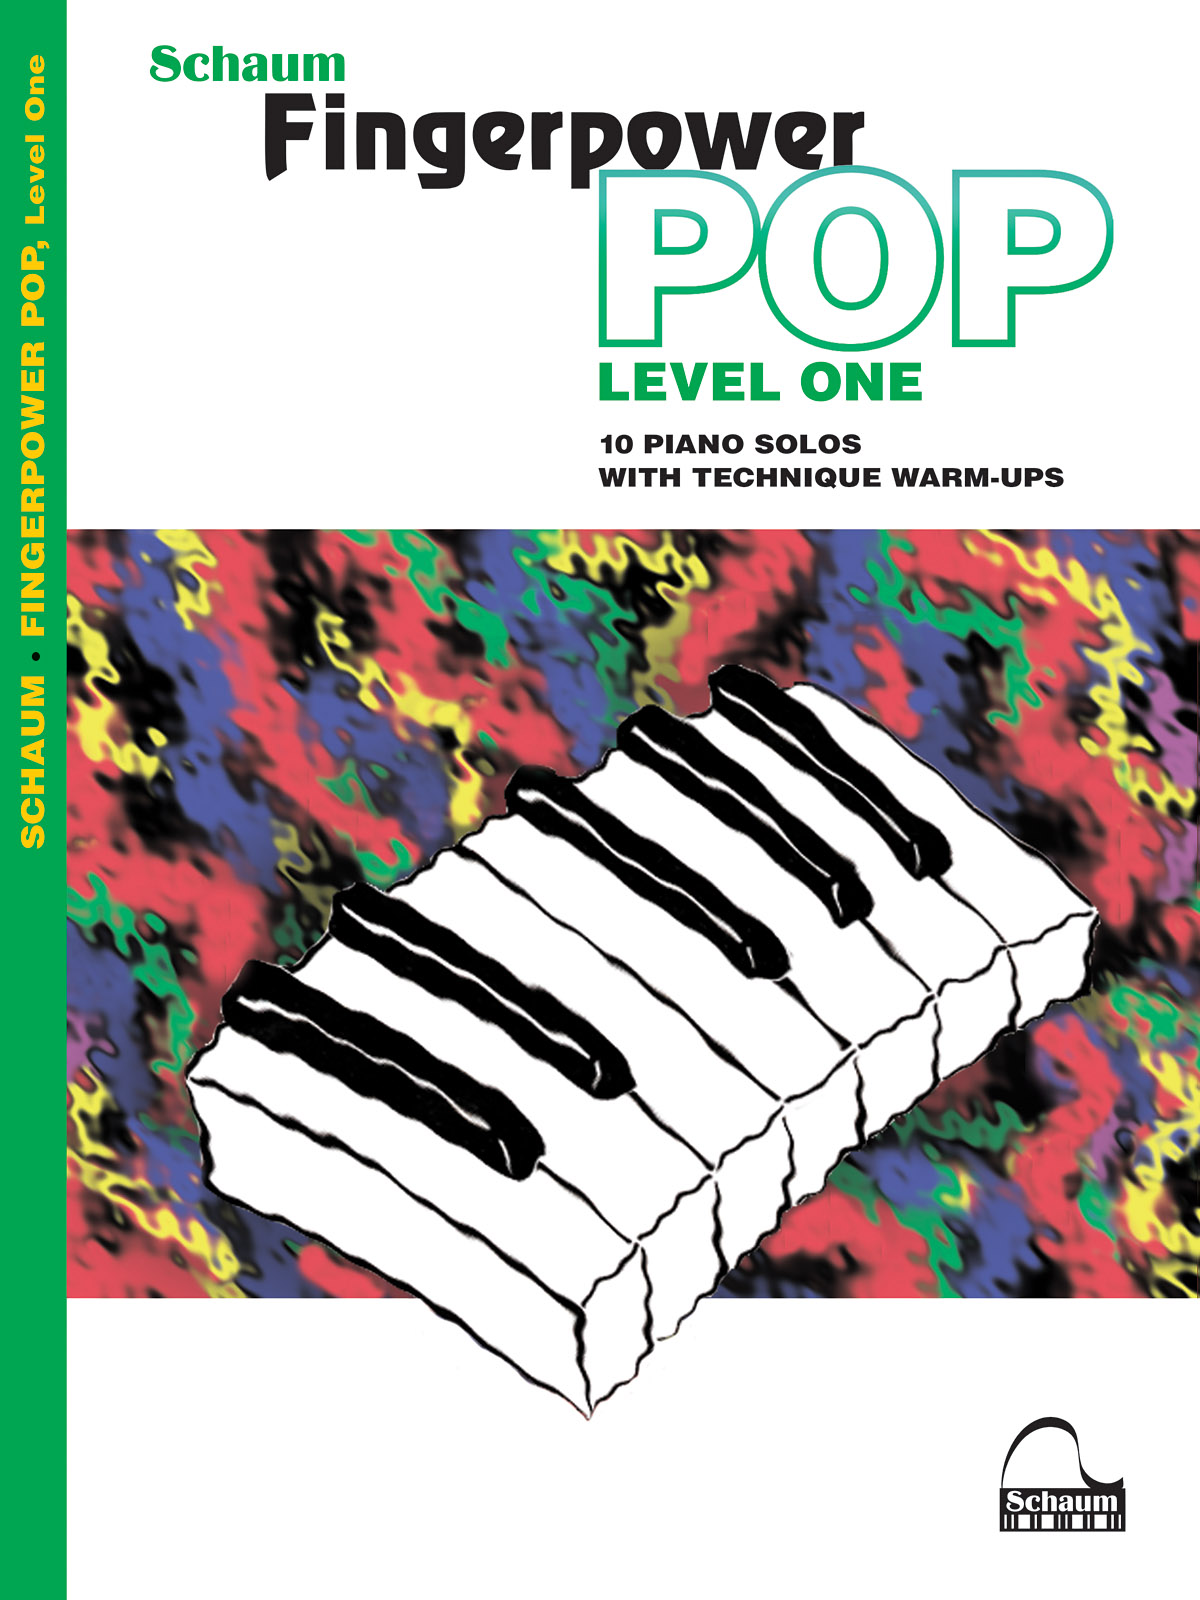 Fingerpower Pop - Level 1 - 10 Piano Solos with Technique Warm-Ups Mid to Late Elementary Lev